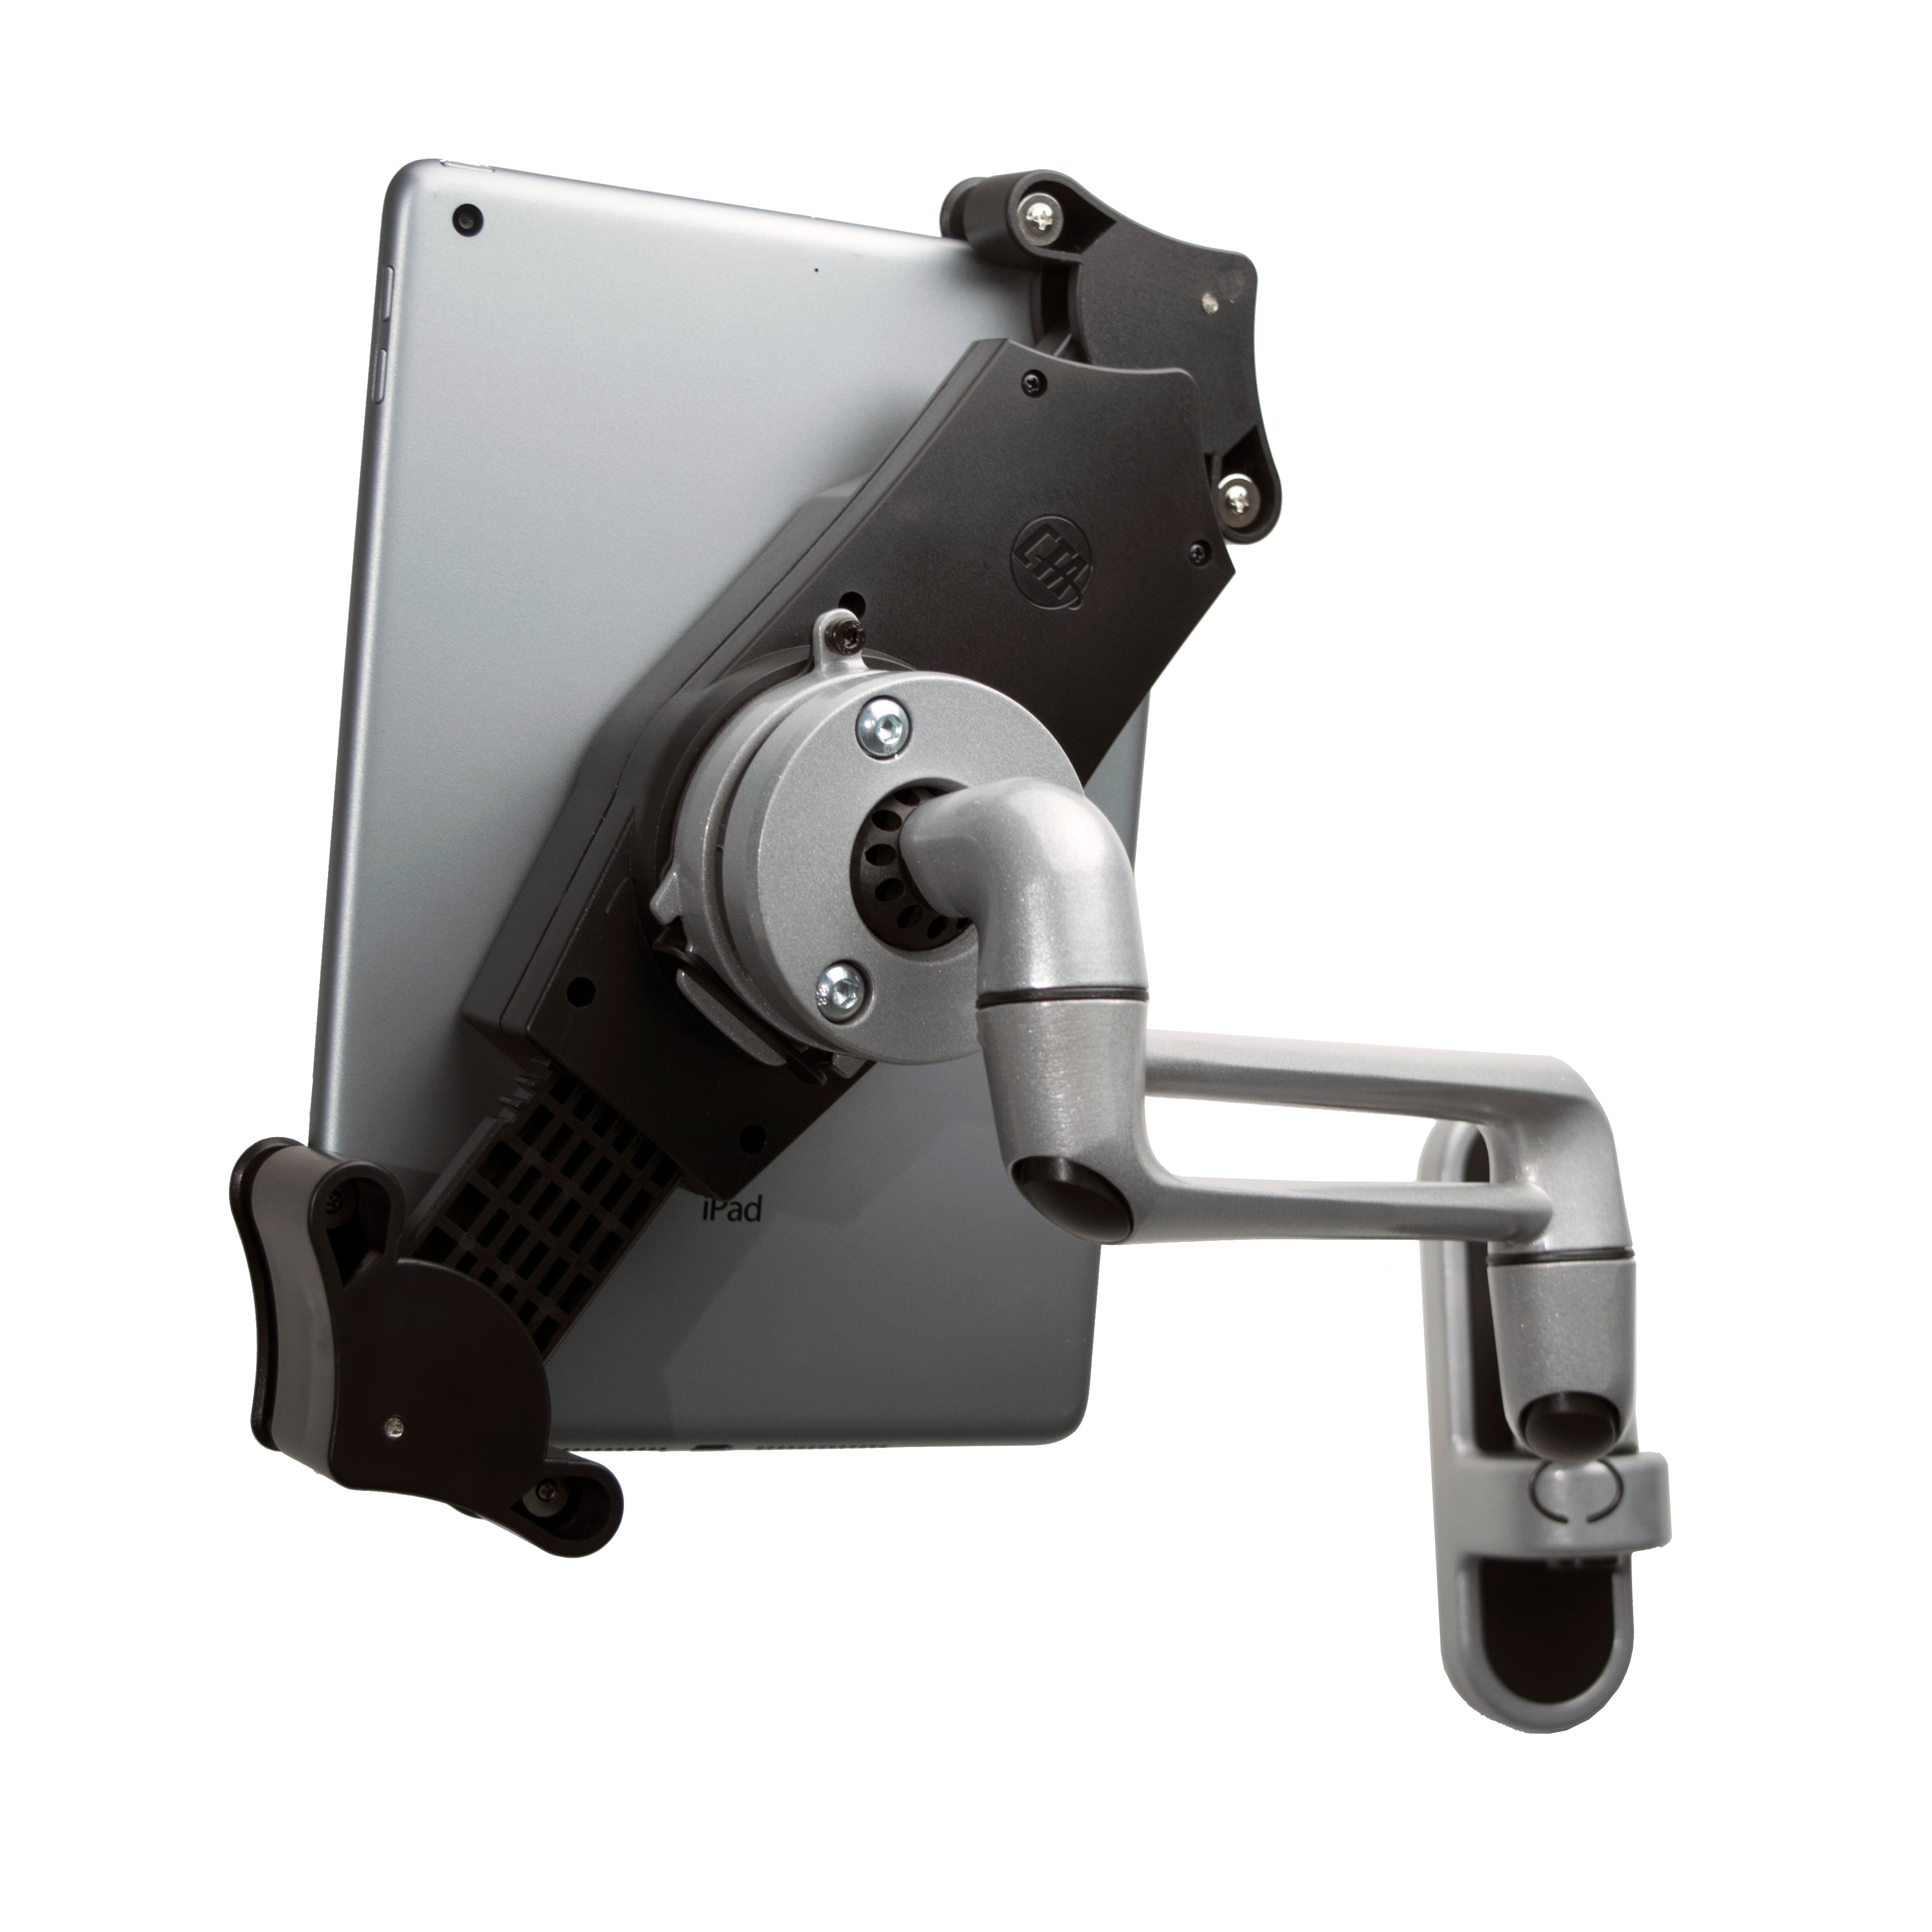 Articulating Tablet Wall Mount for Tablets, including iPad 10.2-inch (7th/ 8th/ 9th Generation)